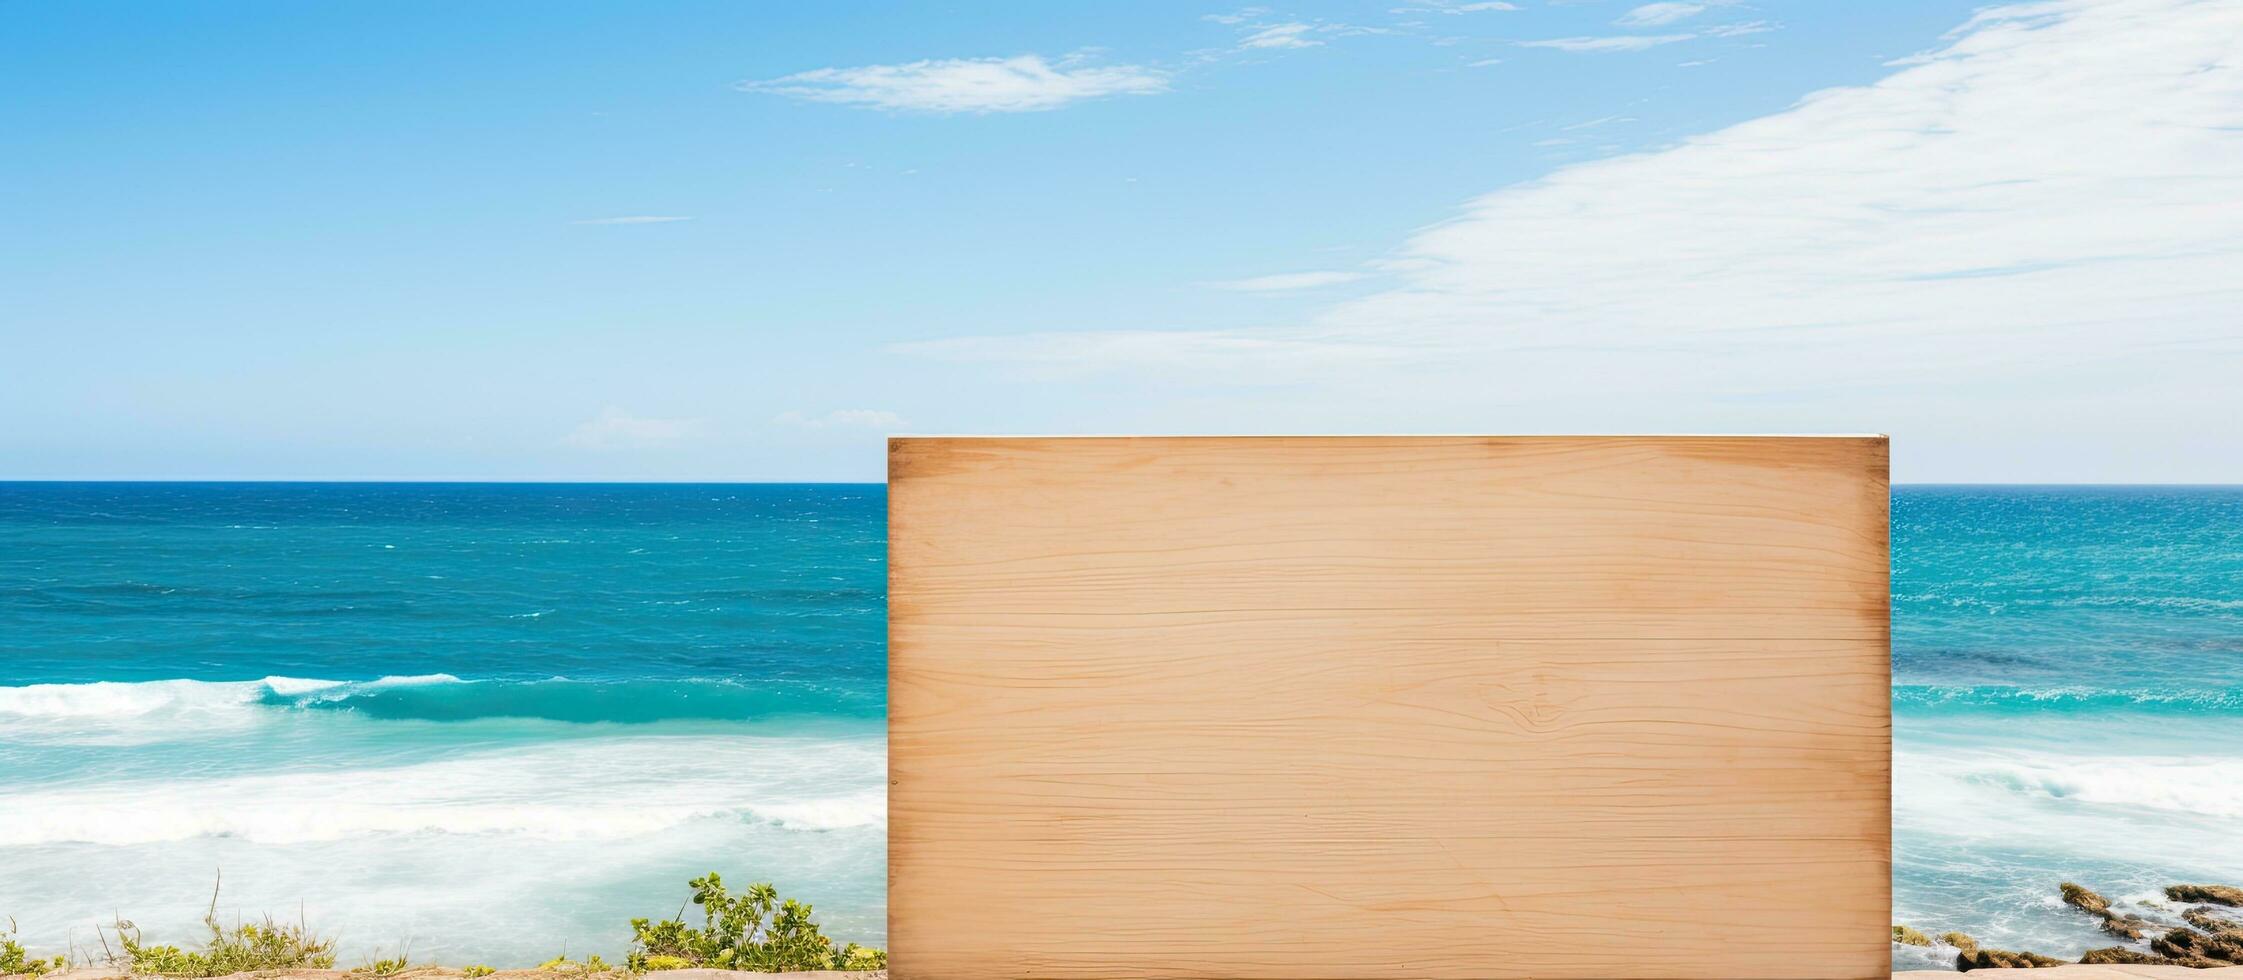 A blank wooden sign is displayed against the backdrop of a blue sky and sea with waves. The sign photo